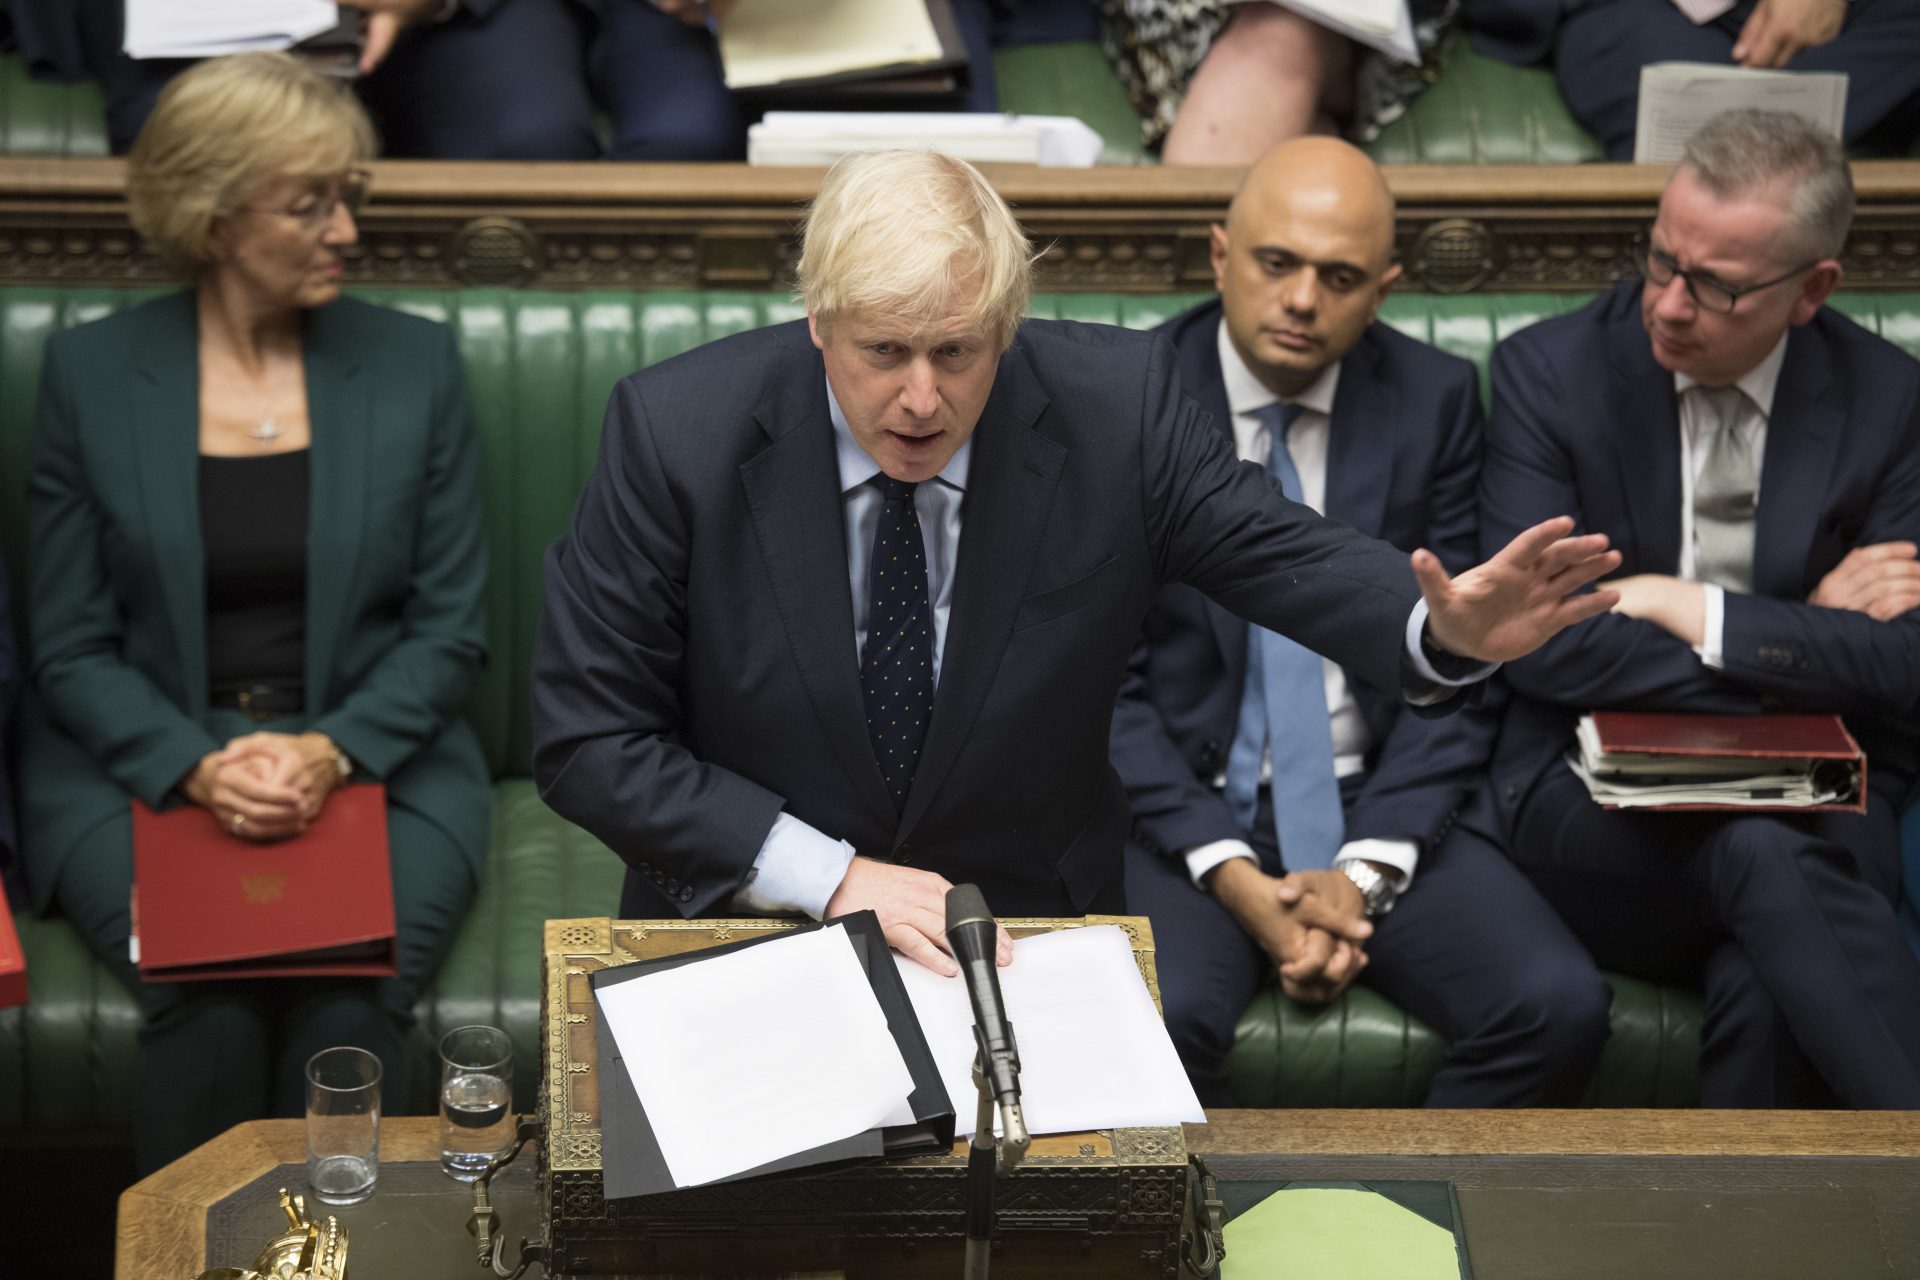 In this image released by the House of Commons, Britain's Prime Minister Boris Johnson speaks in the House of Commons, London, Tuesday Sept. 3, 2019. British Prime Minister Boris Johnson suffered key defections from his party Tuesday, losing a working majority in Parliament and weakening his position as he tried to prevent lawmakers from blocking his Brexit plans.